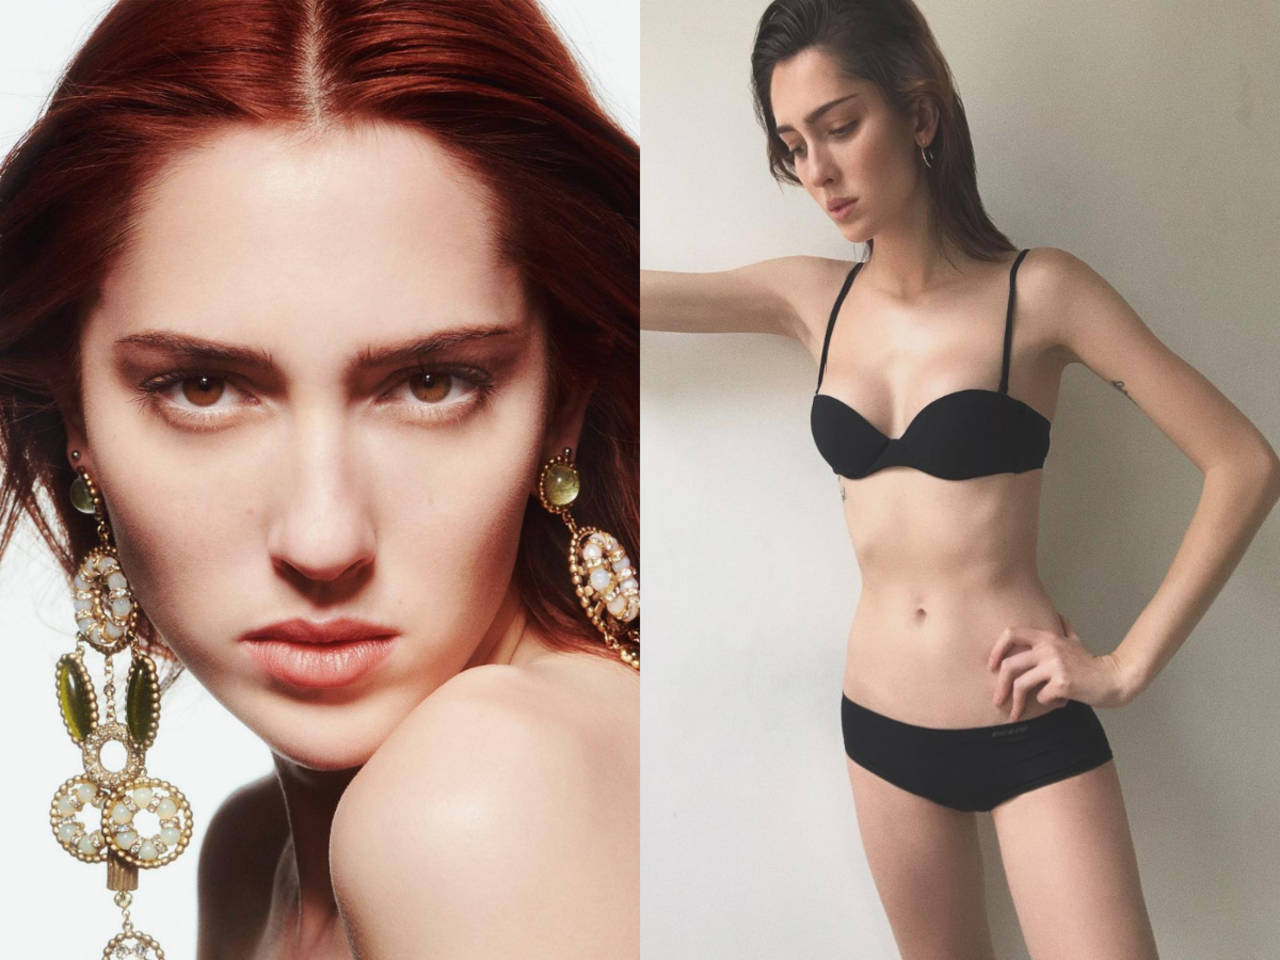 Chanel Beauty hires first openly transgender model and she's going viral -  Times of India